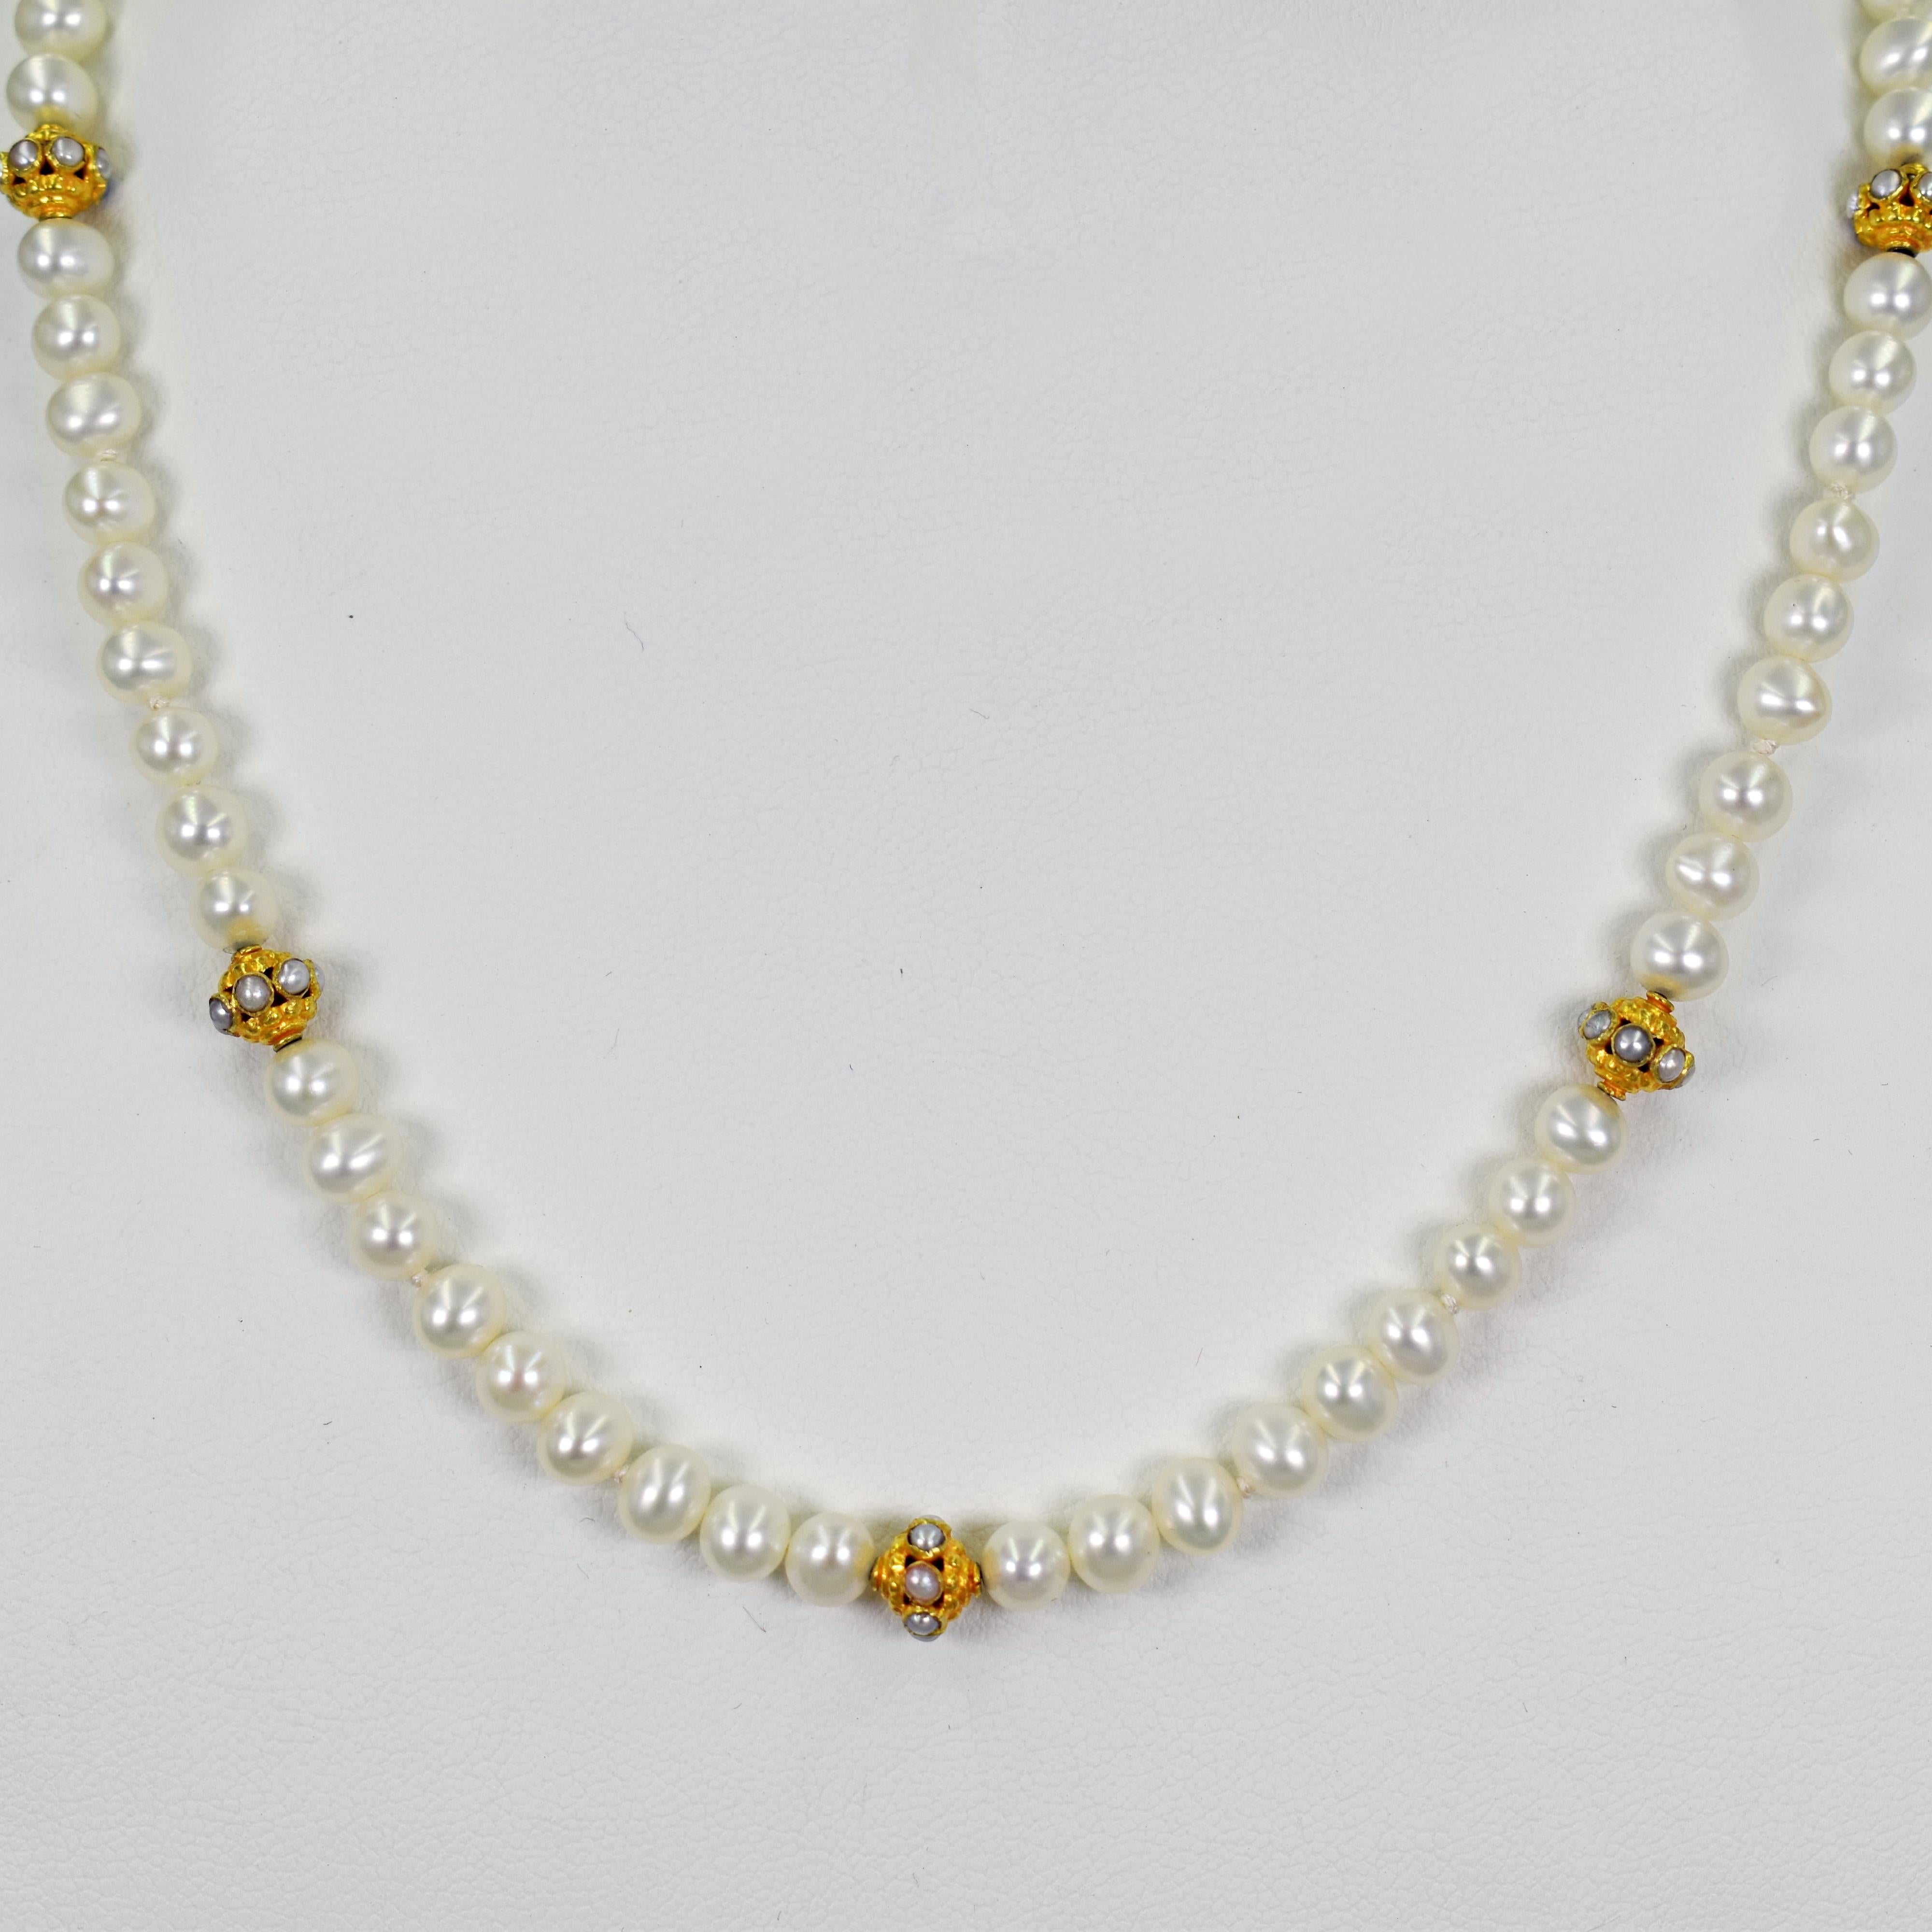 Knotted Freshwater Pearl, seed Pearl and 22k yellow gold beaded necklace. Necklace is finished with a 22k gold toggle clasp. Beaded Pearl strand is 16.5 inches in length. 